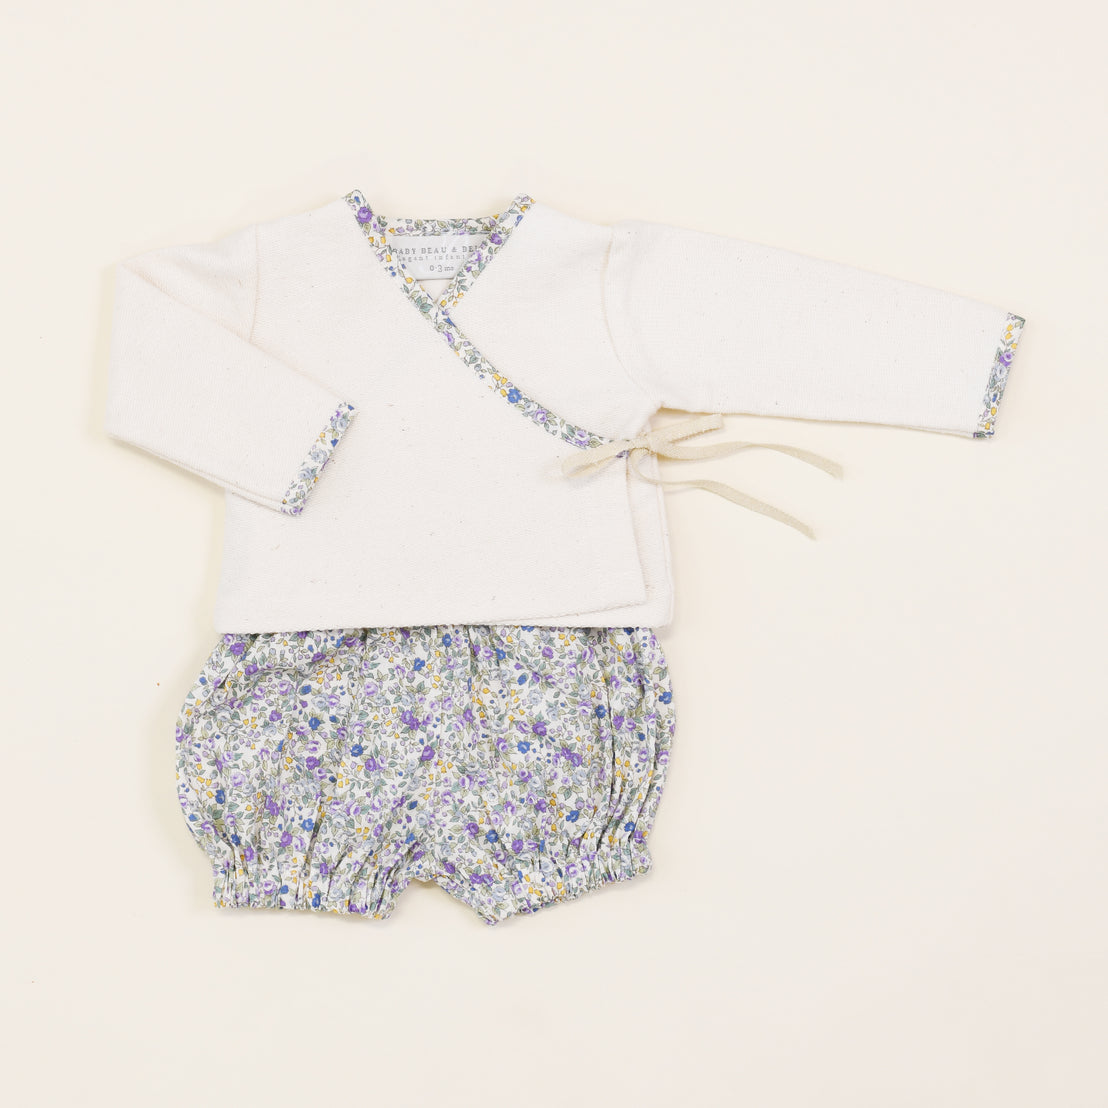 A baby's outfit consisting of the Petite Fleur Wrap Top & Bloomers, displayed on a plain beige background.